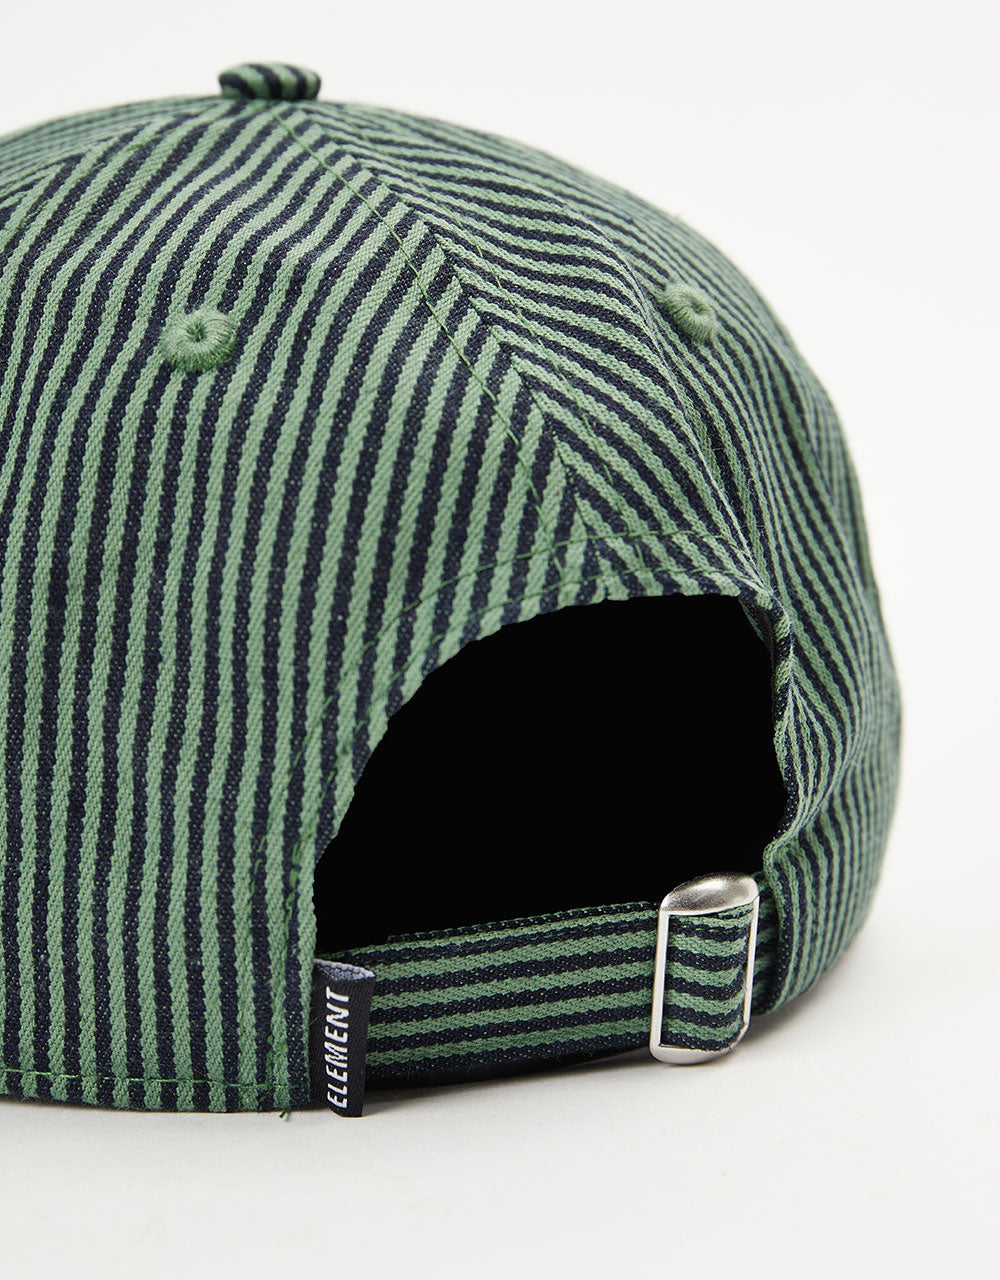 Element Fluky Dad Cap - Hickory Green